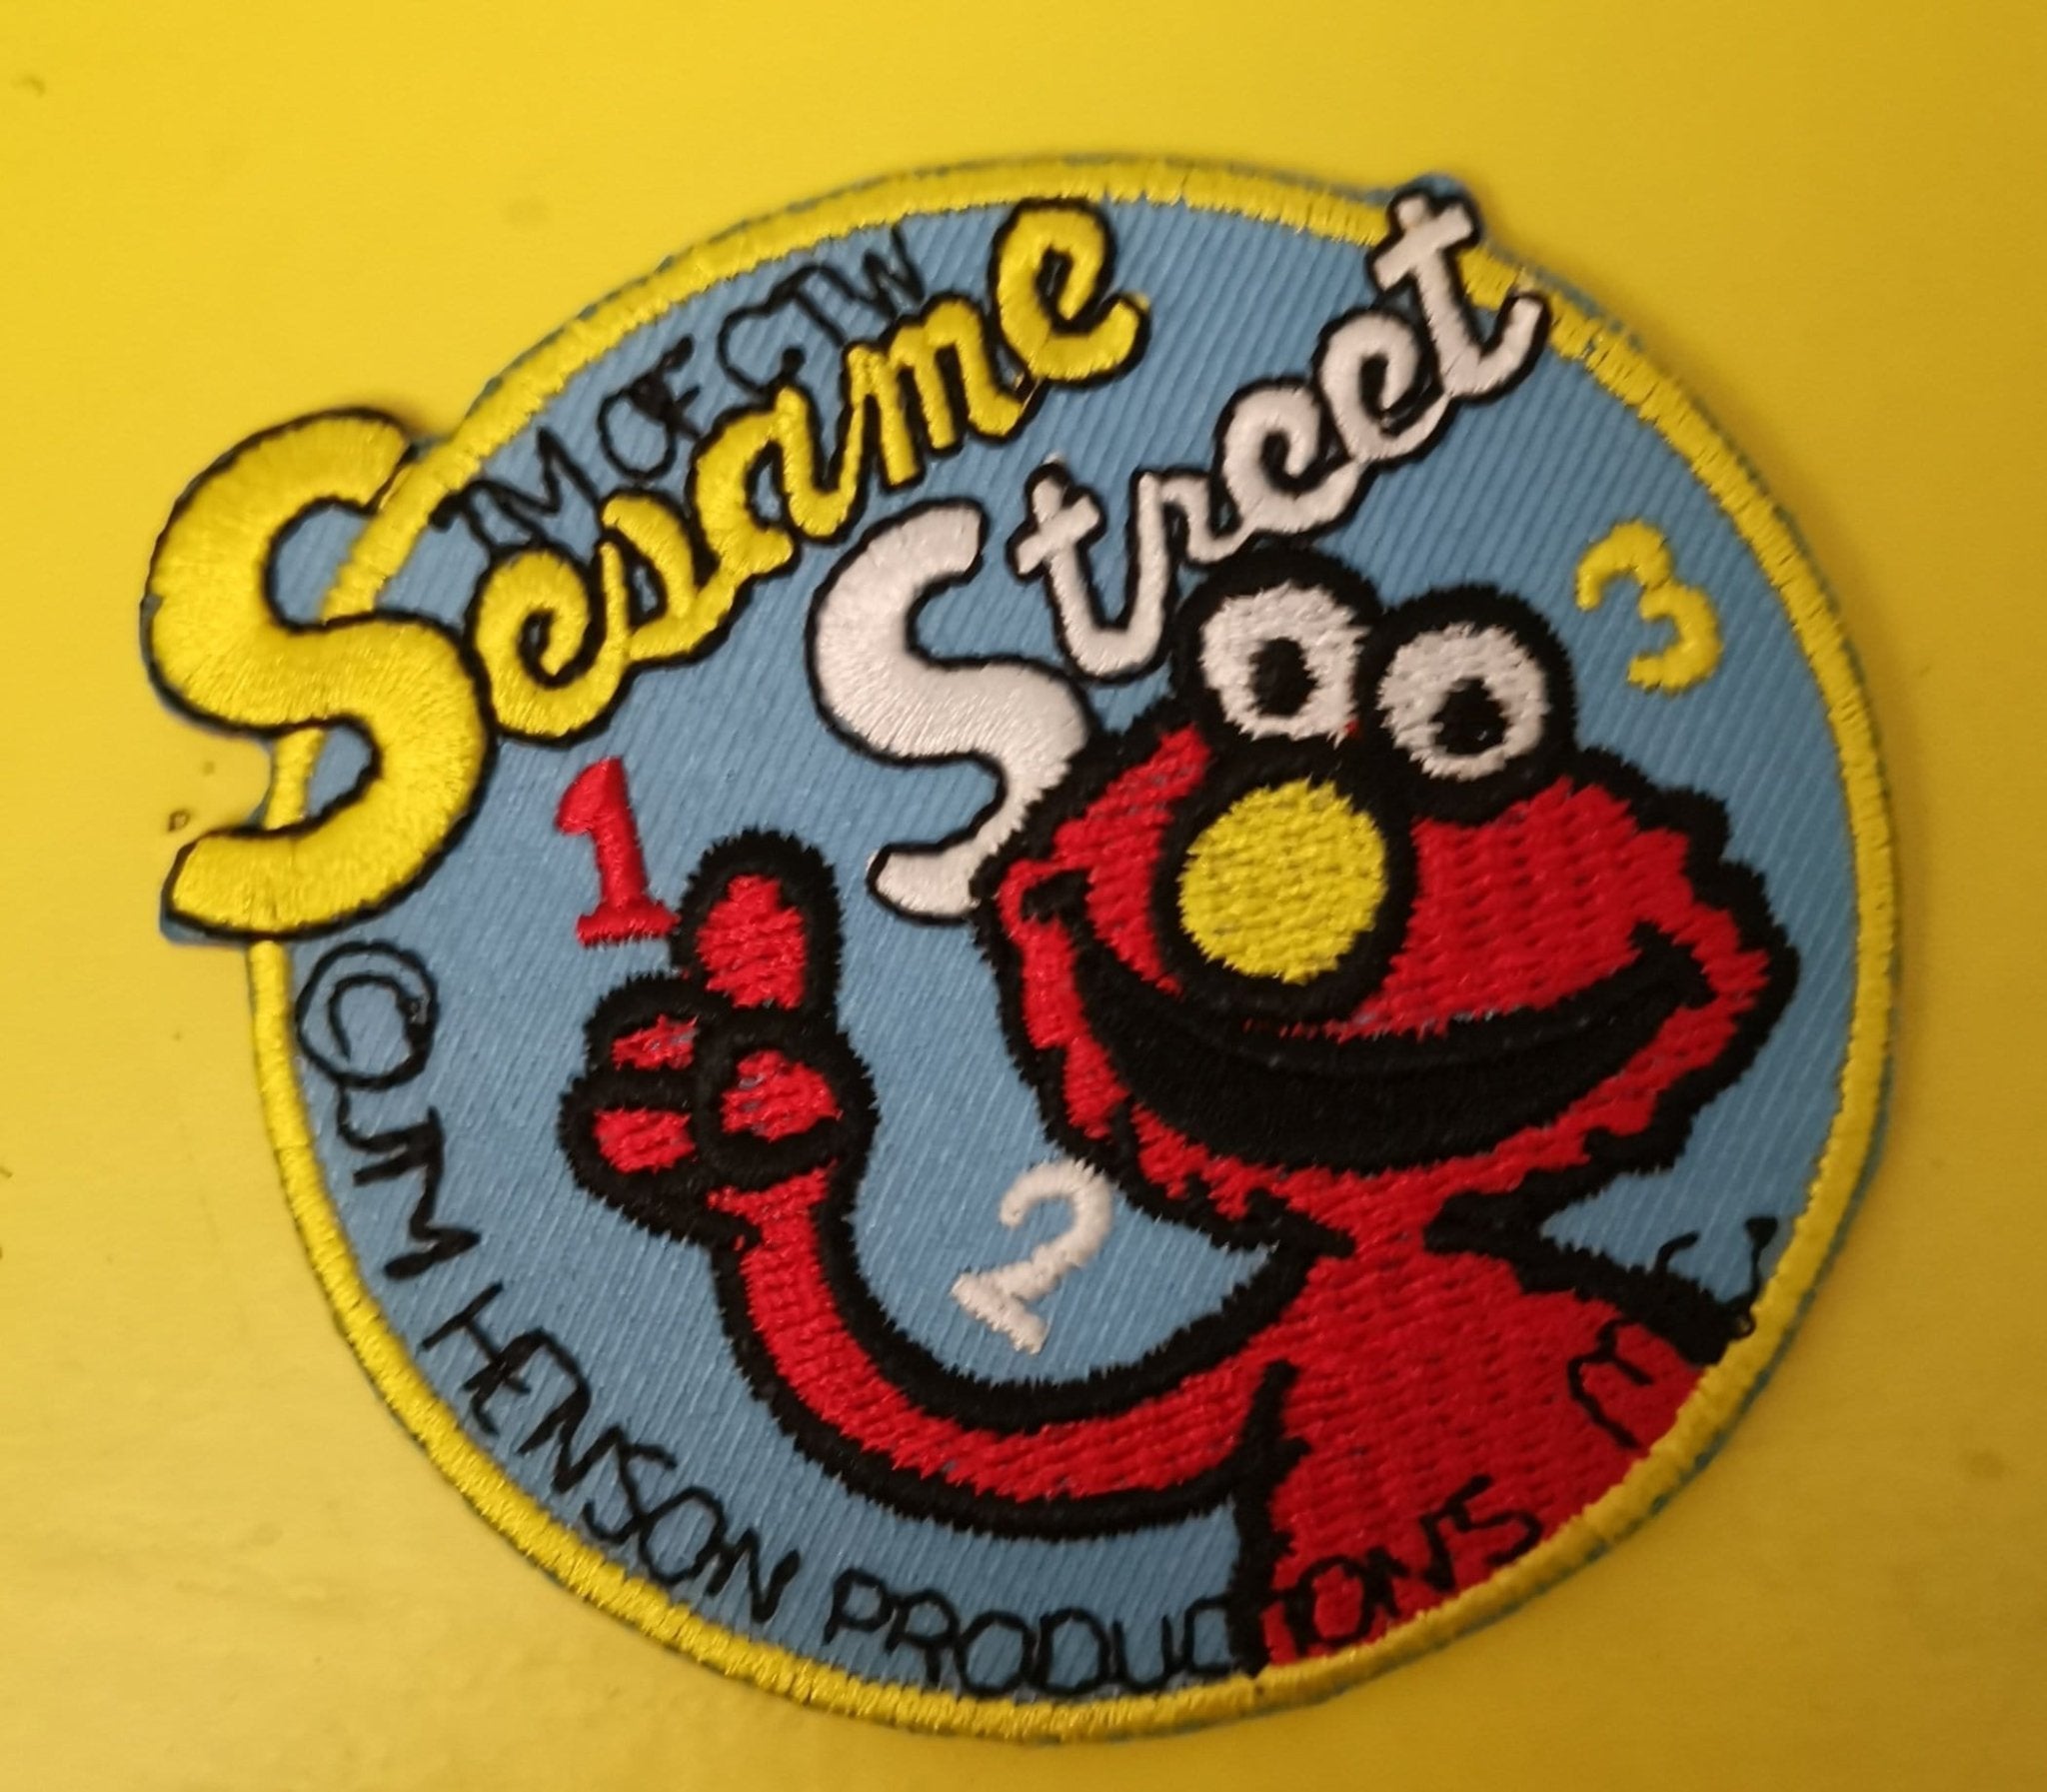 Sesame street Embroidered Iron on Patch